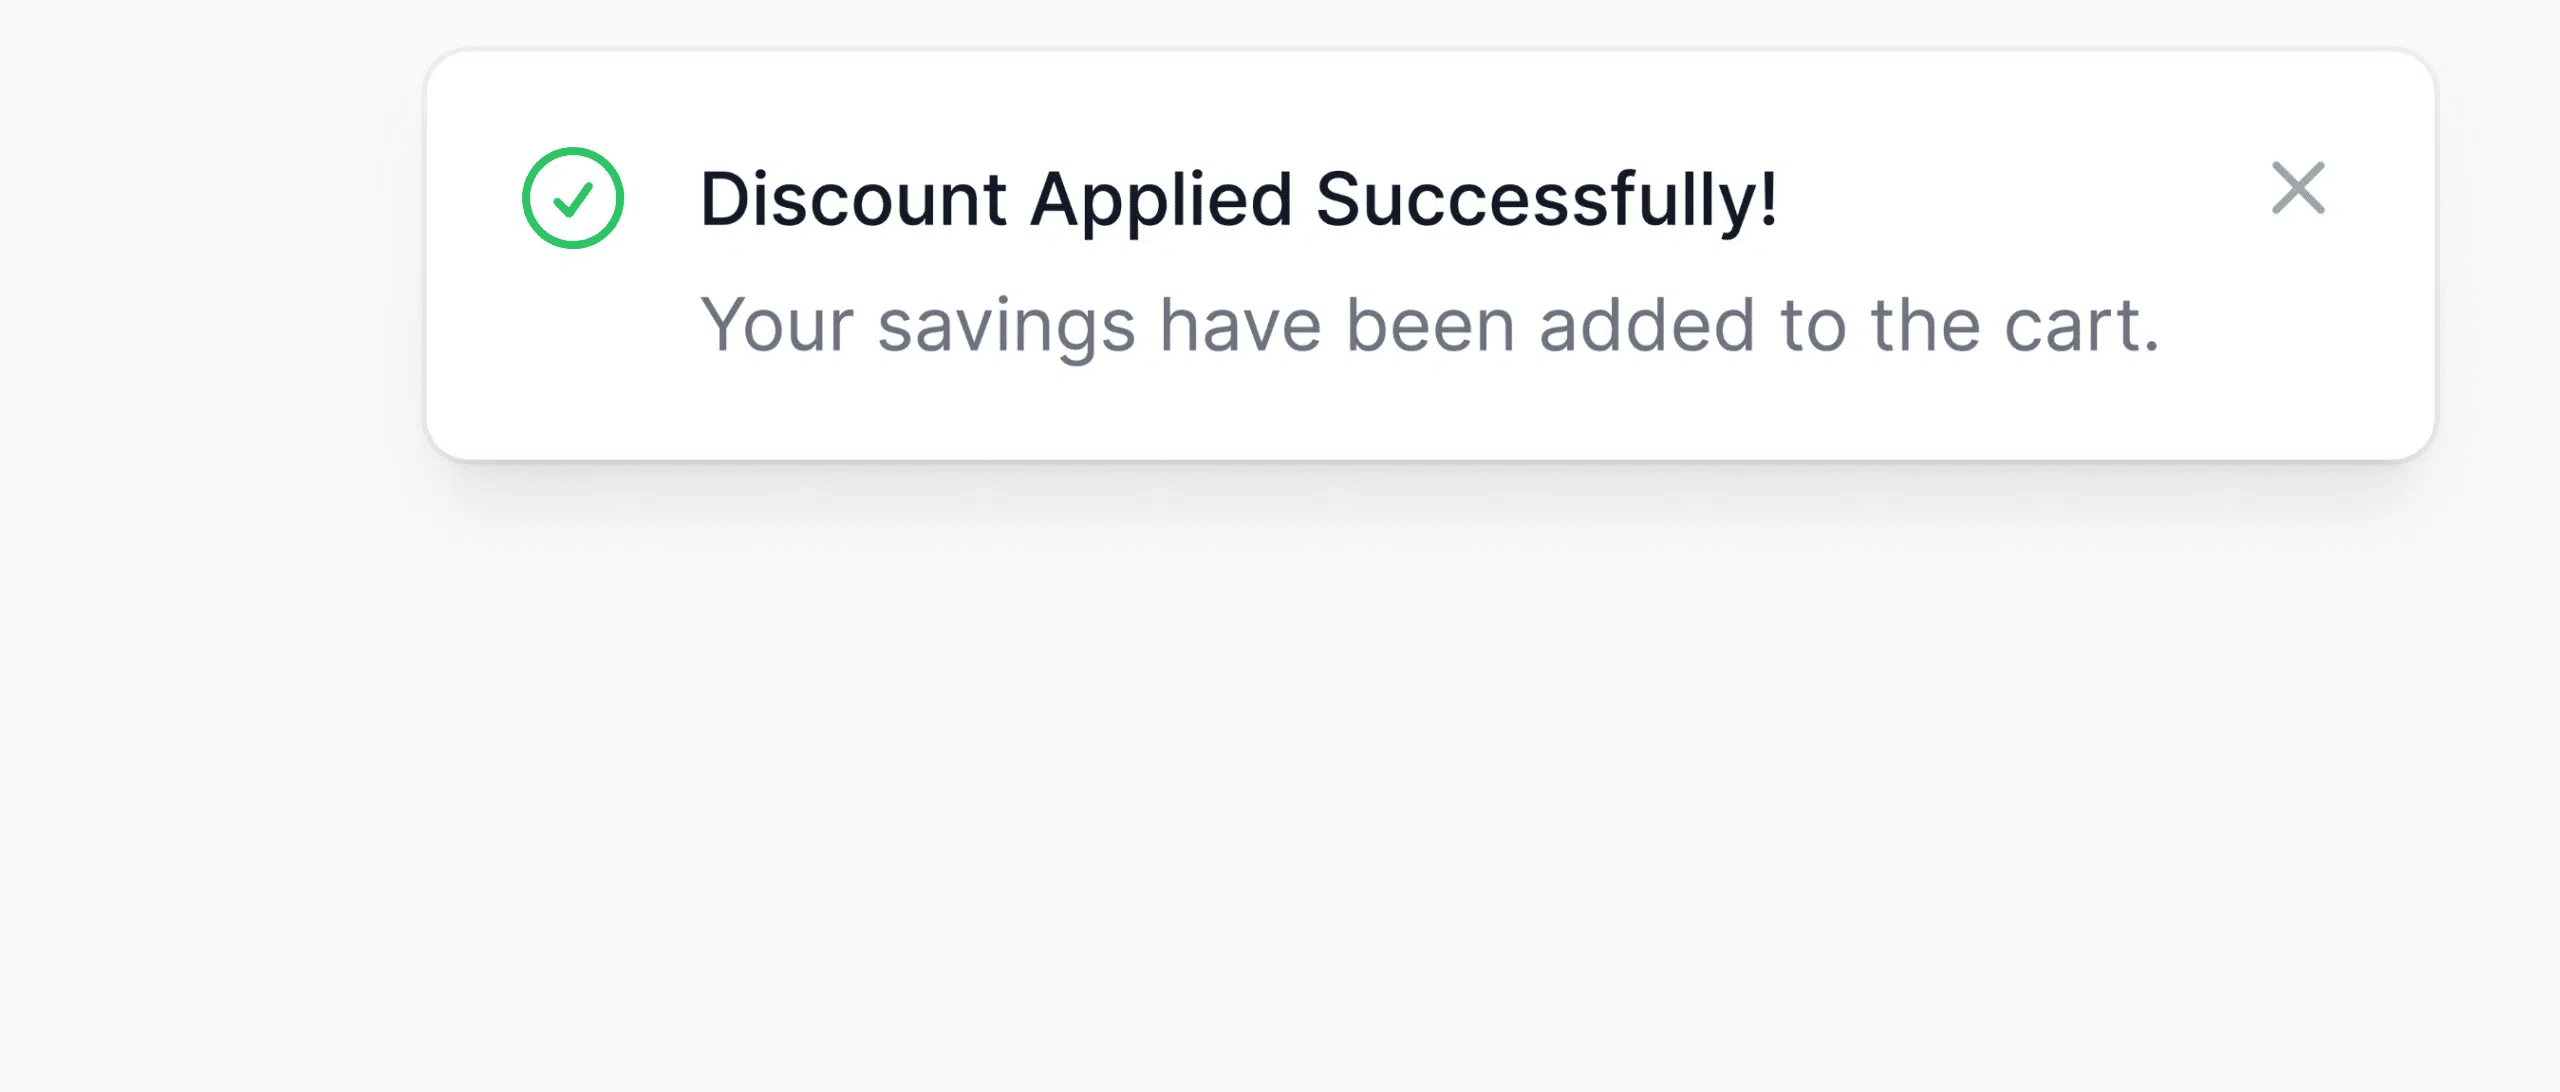 The discount notification